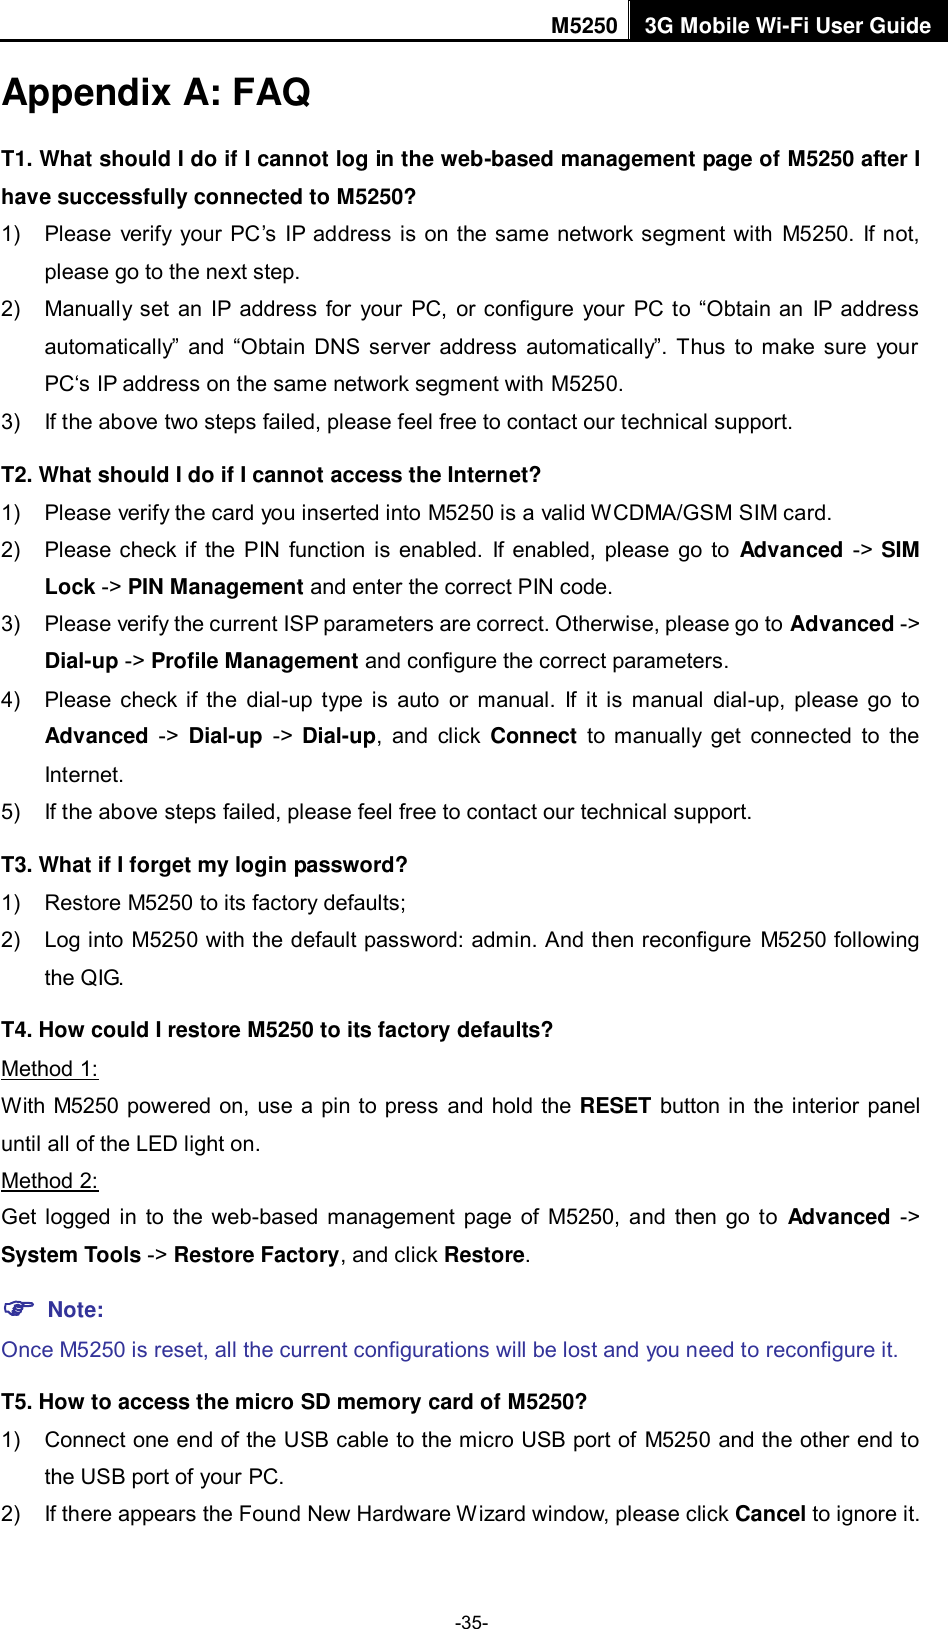 M5250 3G Mobile Wi-Fi User Guide  -35- Appendix A: FAQ T1. What should I do if I cannot log in the web-based management page of M5250 after I have successfully connected to M5250? 1)  Please  verify  your PC‟s  IP  address is on the same network segment with  M5250.  If not, please go to the next step. 2)  Manually set  an  IP address  for  your  PC,  or  configure  your  PC to  “Obtain an  IP address automatically”  and  “Obtain  DNS  server  address  automatically”.  Thus  to  make sure  your PC„s IP address on the same network segment with M5250. 3)  If the above two steps failed, please feel free to contact our technical support.   T2. What should I do if I cannot access the Internet? 1)  Please verify the card you inserted into M5250 is a valid WCDMA/GSM SIM card. 2)  Please check if the PIN function  is enabled.  If enabled, please go  to  Advanced -&gt;  SIM Lock -&gt; PIN Management and enter the correct PIN code. 3)  Please verify the current ISP parameters are correct. Otherwise, please go to Advanced -&gt; Dial-up -&gt; Profile Management and configure the correct parameters.     4)  Please  check if  the  dial-up  type  is  auto  or  manual.  If  it  is  manual  dial-up,  please  go  to Advanced  -&gt;  Dial-up  -&gt;  Dial-up,  and  click  Connect  to  manually  get  connected  to  the Internet. 5)  If the above steps failed, please feel free to contact our technical support. T3. What if I forget my login password? 1)  Restore M5250 to its factory defaults; 2)  Log into M5250 with the default password: admin. And then reconfigure  M5250 following the QIG. T4. How could I restore M5250 to its factory defaults? Method 1: With M5250 powered on, use a pin to press and hold the RESET button in the interior  panel until all of the LED light on. Method 2: Get  logged  in  to  the  web-based  management page  of  M5250,  and  then  go  to  Advanced  -&gt; System Tools -&gt; Restore Factory, and click Restore.  Note:   Once M5250 is reset, all the current configurations will be lost and you need to reconfigure it. T5. How to access the micro SD memory card of M5250? 1)  Connect one end of the USB cable to the micro USB port of  M5250 and the other end to the USB port of your PC. 2)  If there appears the Found New Hardware Wizard window, please click Cancel to ignore it. 